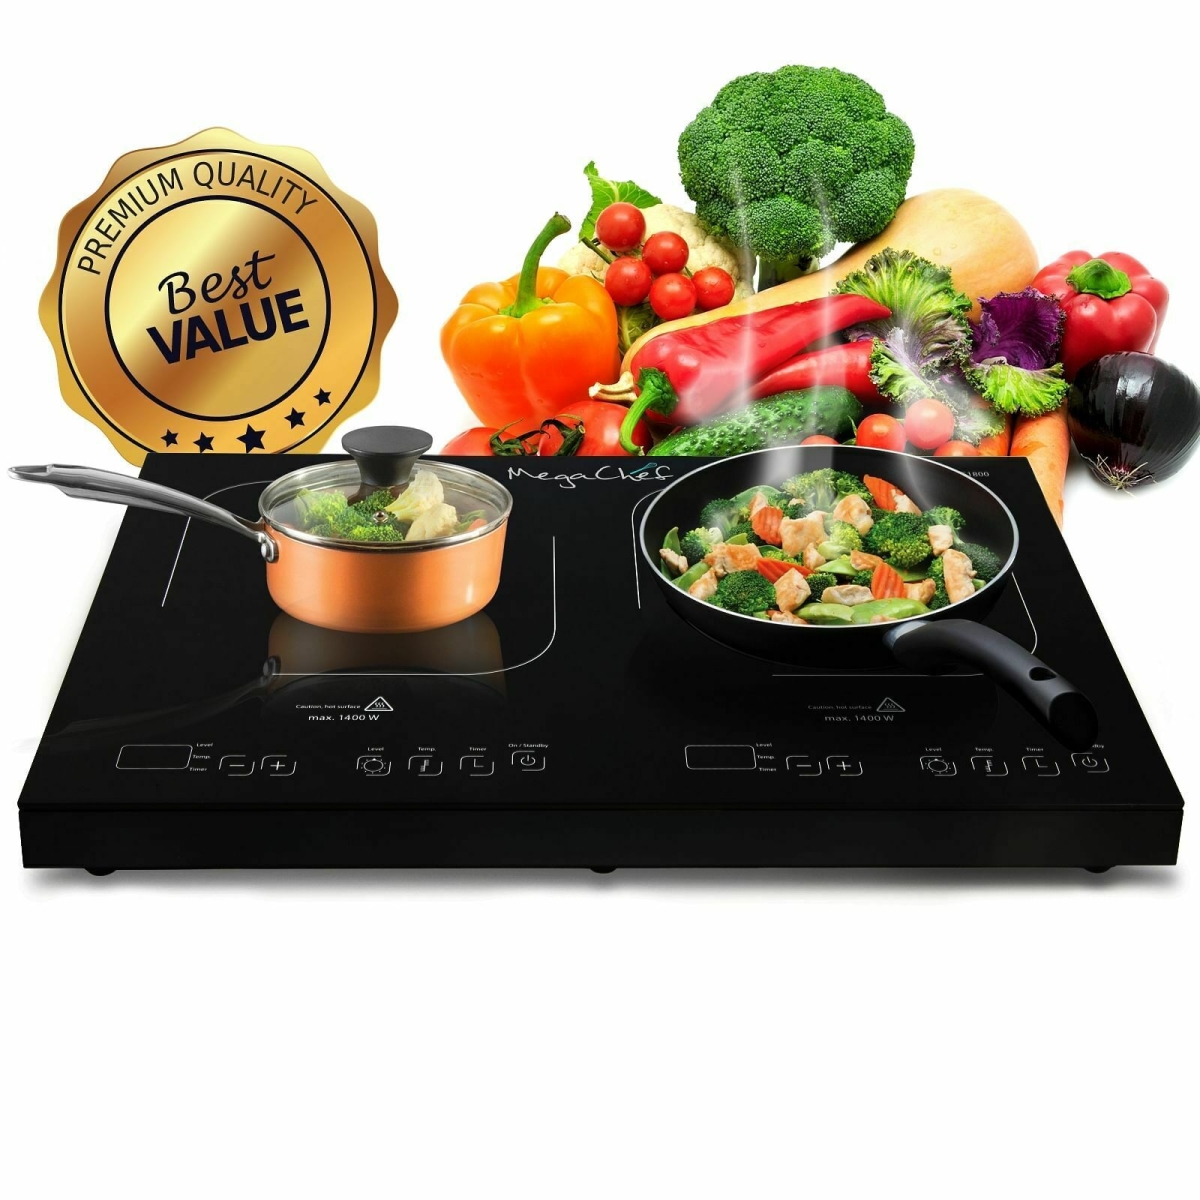 Picture of MegaChef MC-1900 1400W Portable Dual Induction Cooktop